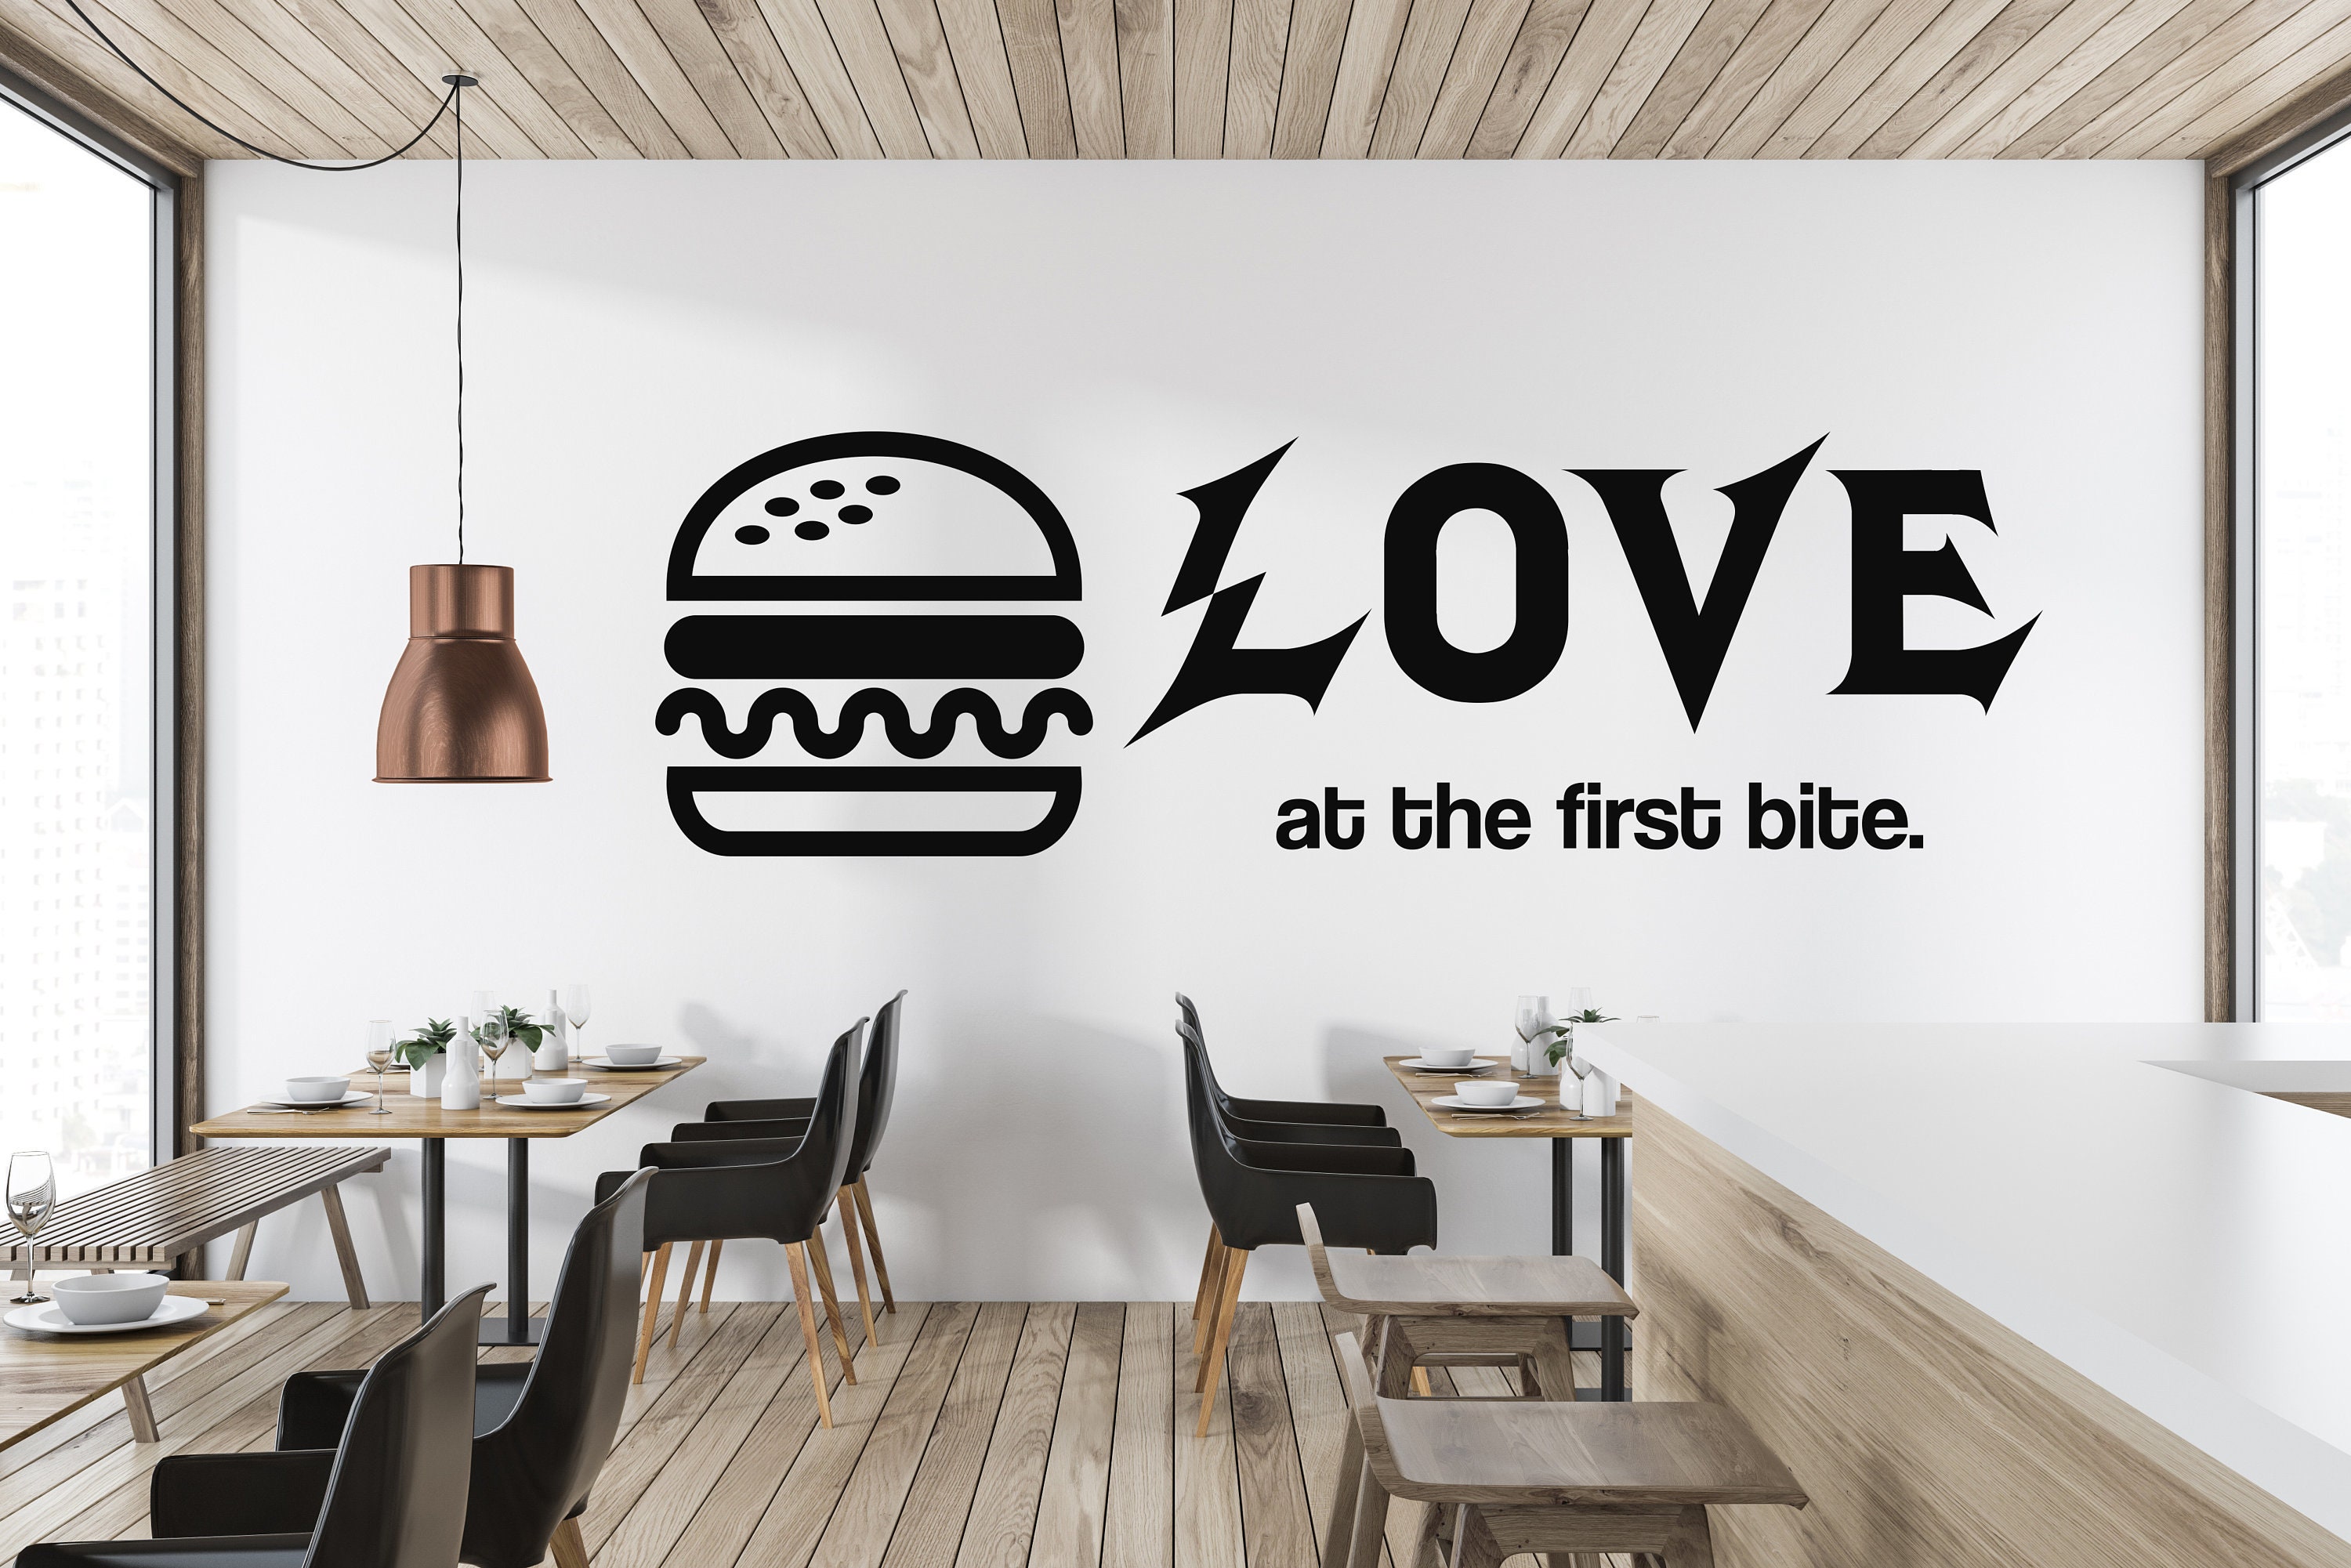 Burger advertisement wall poster sticker - Burger wall sticker - Burger  wall poster sticker - 300GSM - Glossy - Strong adhesive - starxdecals